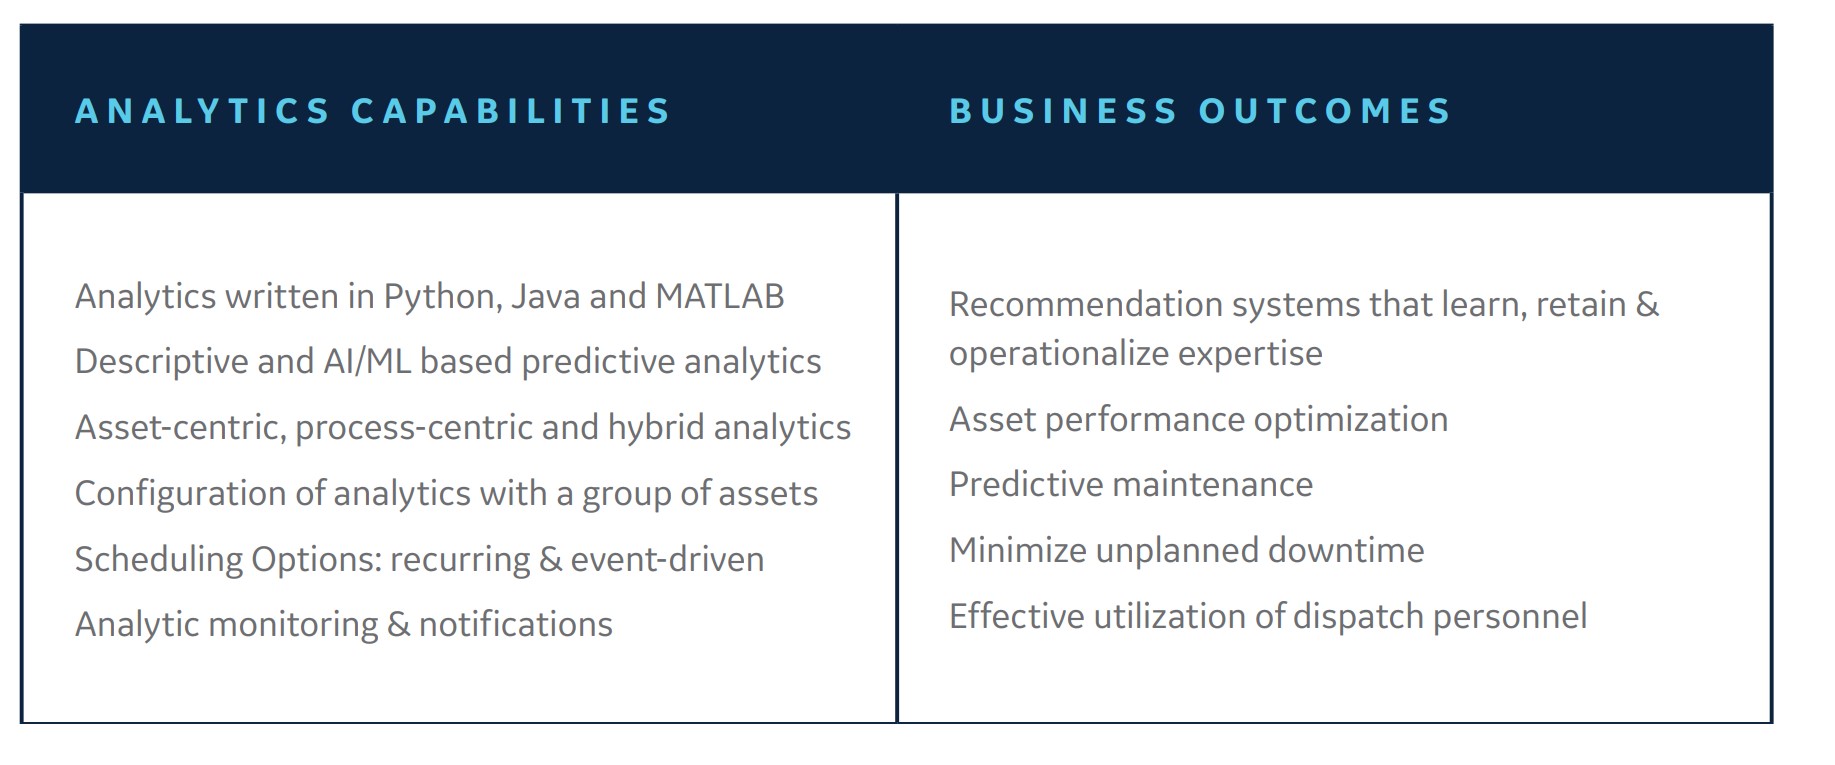 Analytics capabilities and business outcomes for APM in the cloud